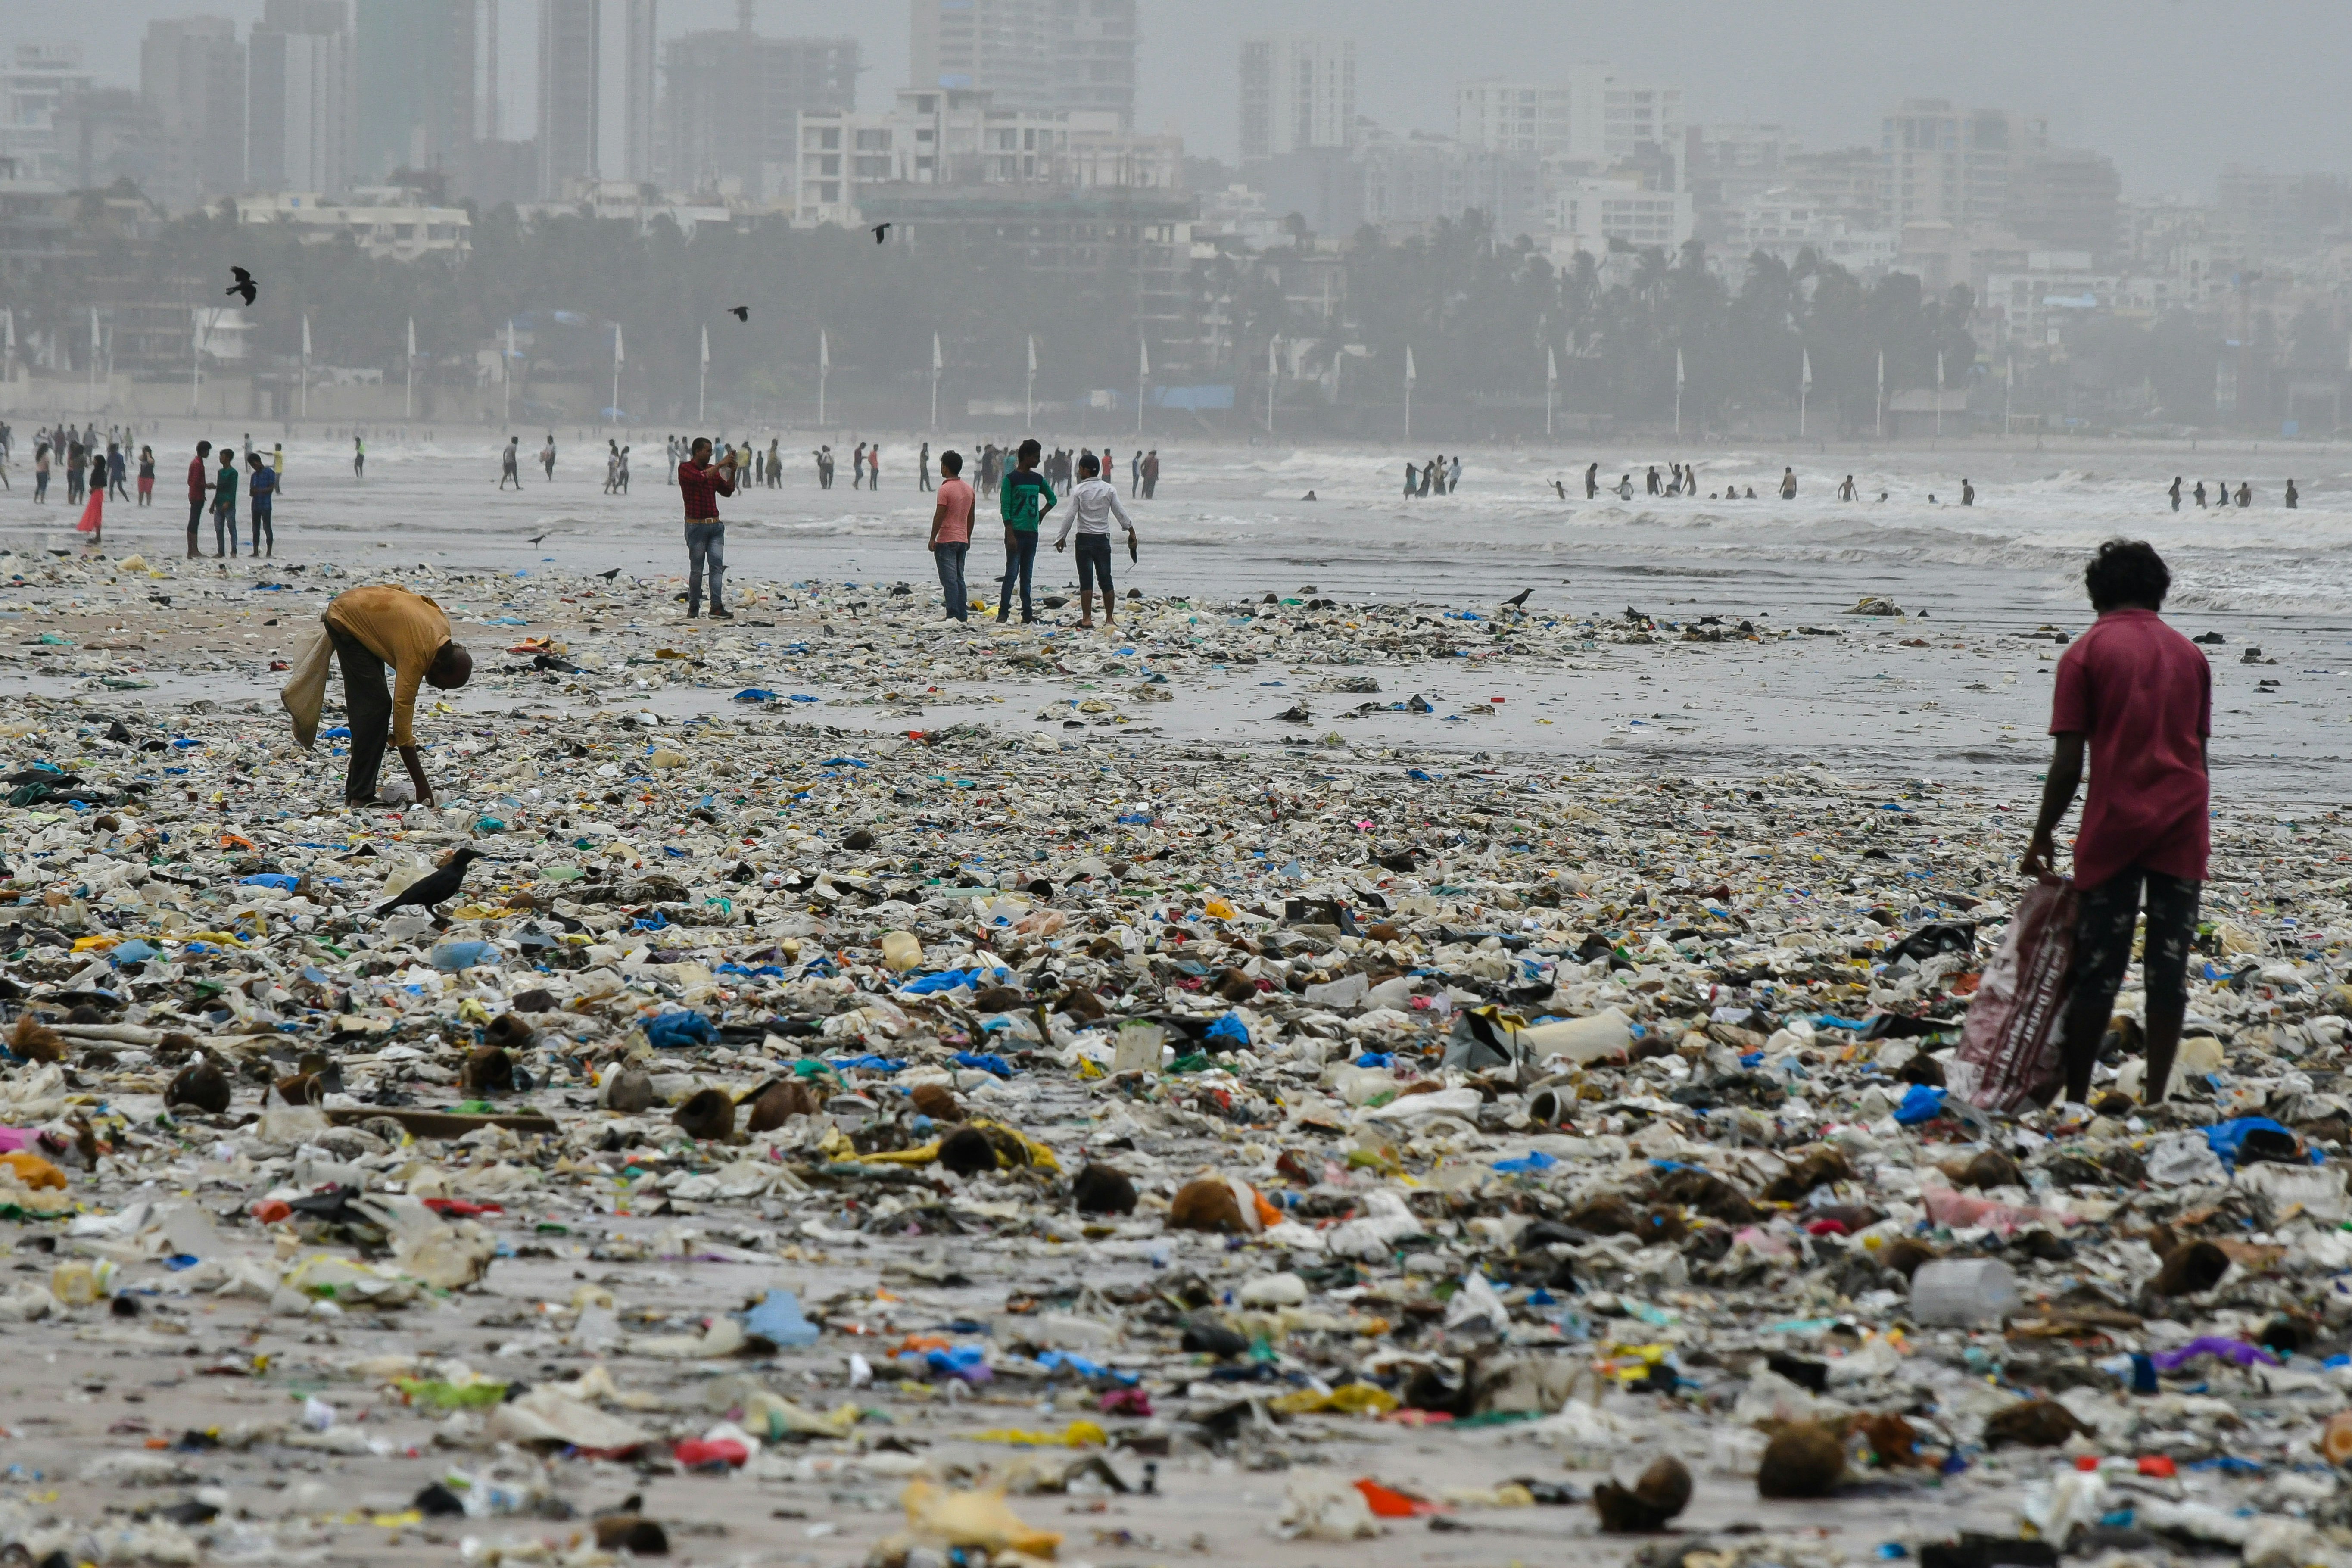 Two litter pickers work their way through the rubbish that carpets the sand of Juhu Beach in Mumbai. The beach is completely covered in litter due to the recent monsoon storms.